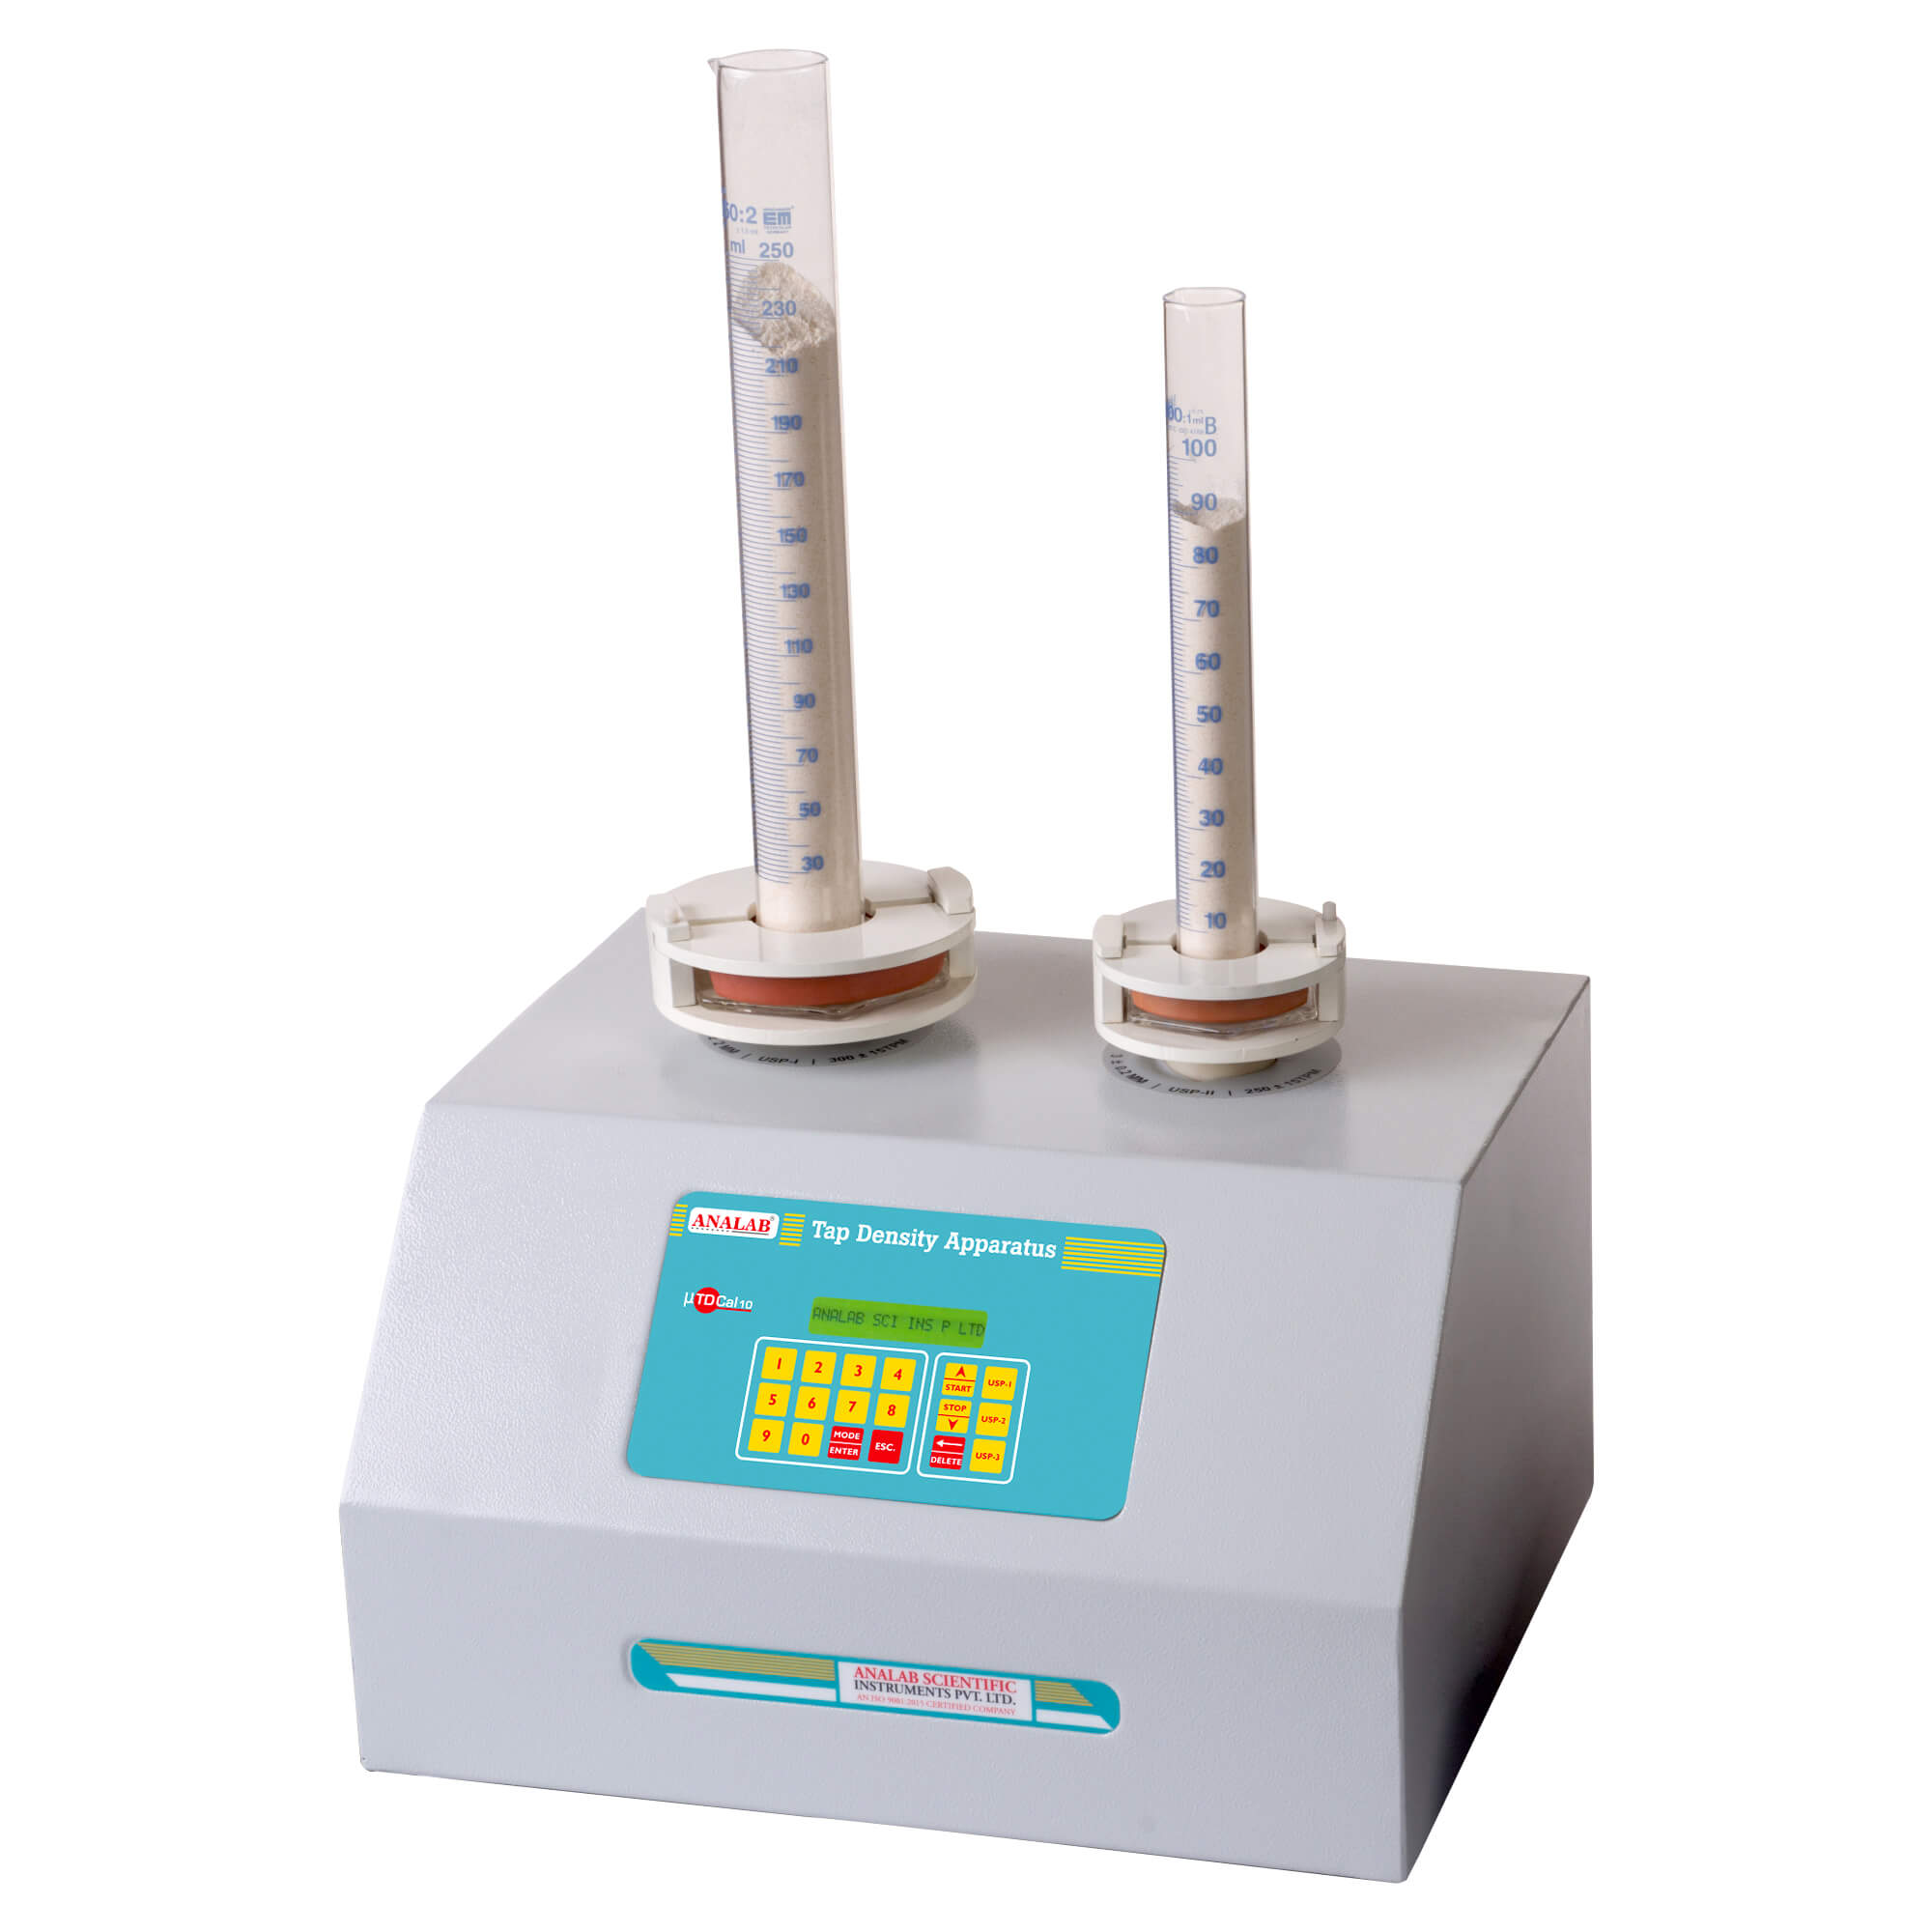 products images Tap Density Test Apparatus Model : µTDCal10 Manufacturer in India